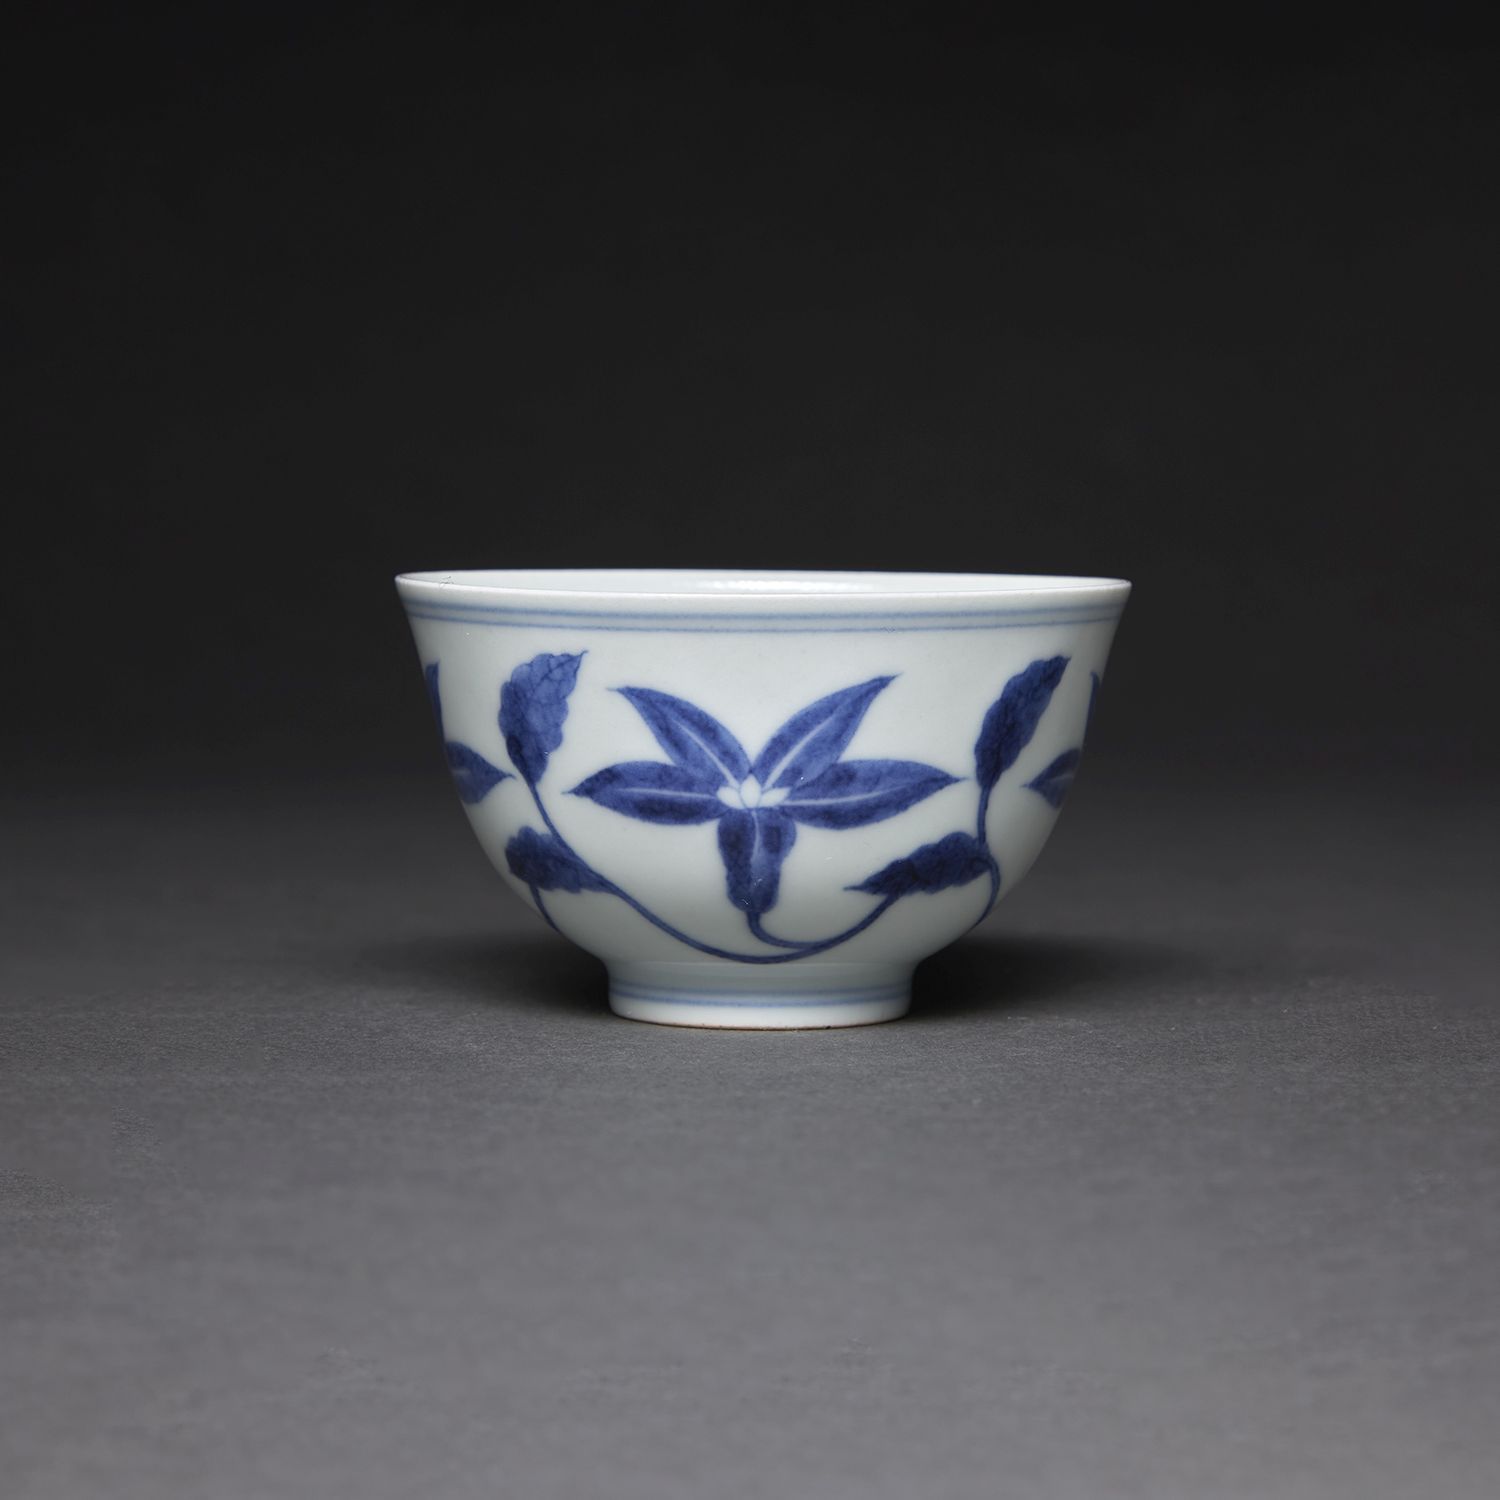 Null SMALL CUP
in white-blue porcelain, decorated with floral stems. Apocryphal &hellip;